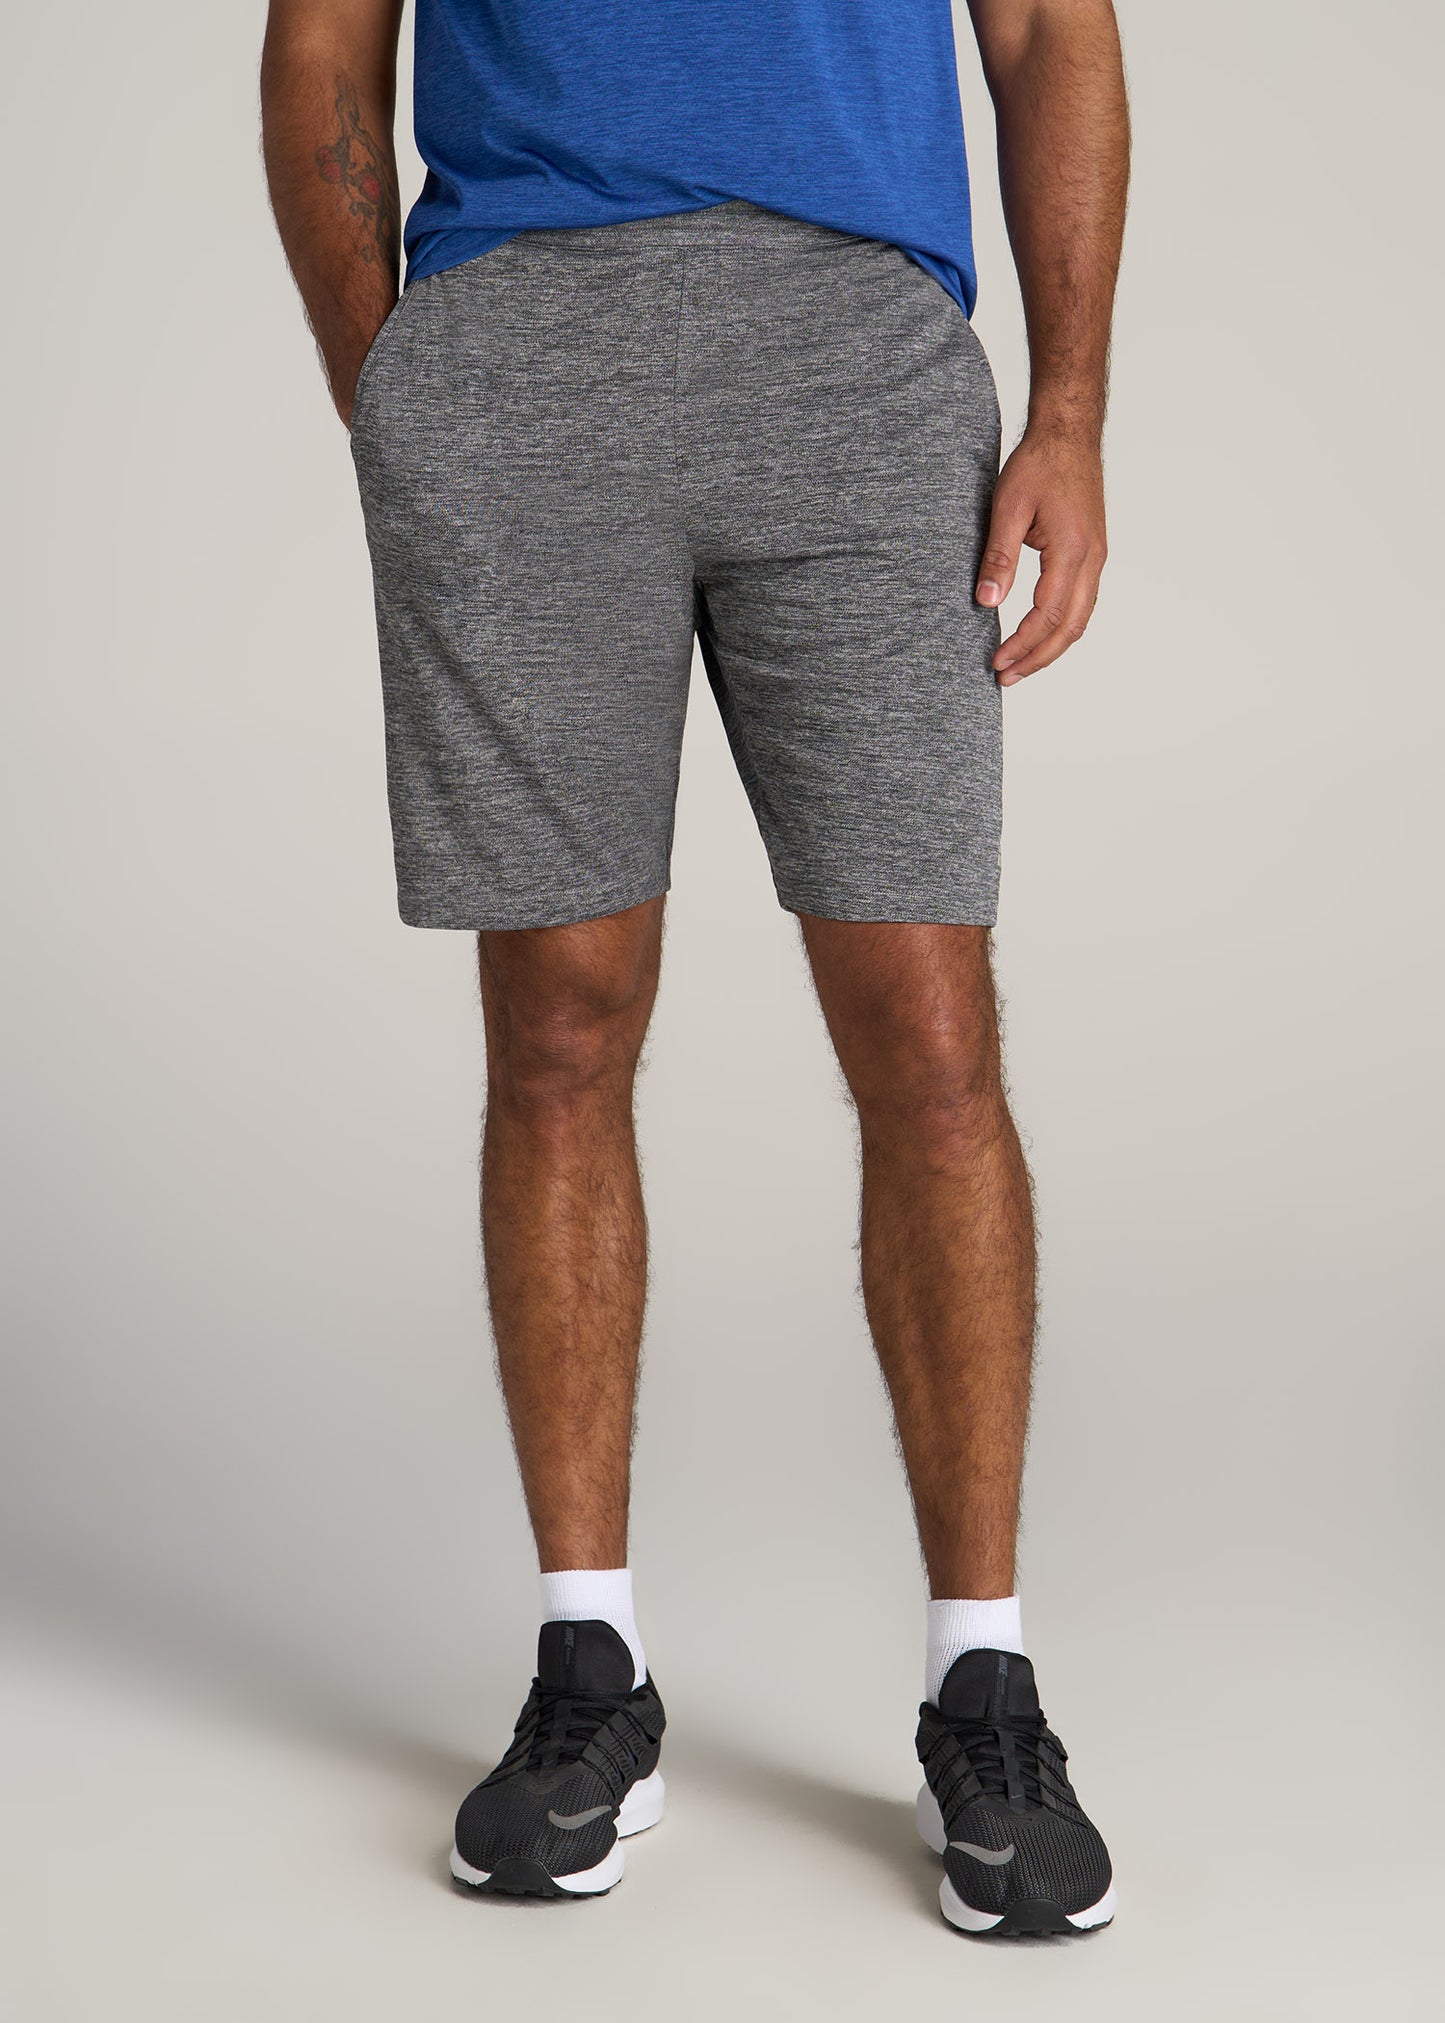 American-Tall-Men-AT-Performance-Engineered-Athletic-Shorts-GreyMix-front